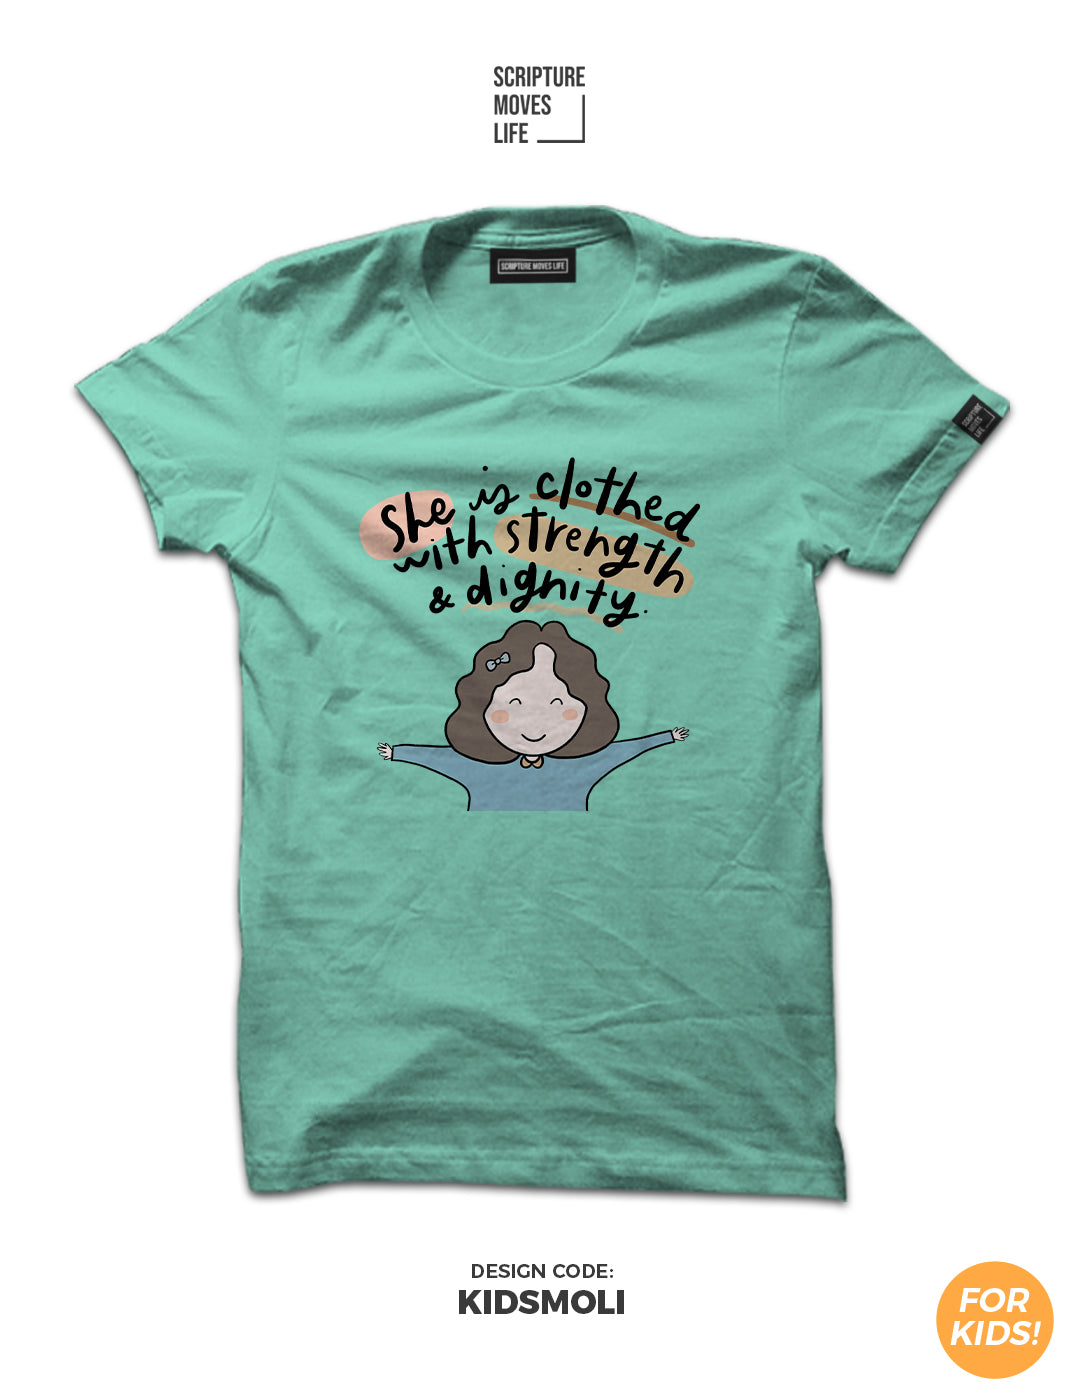 Scripture Mini-Kids-She is clothed with strength and dignity